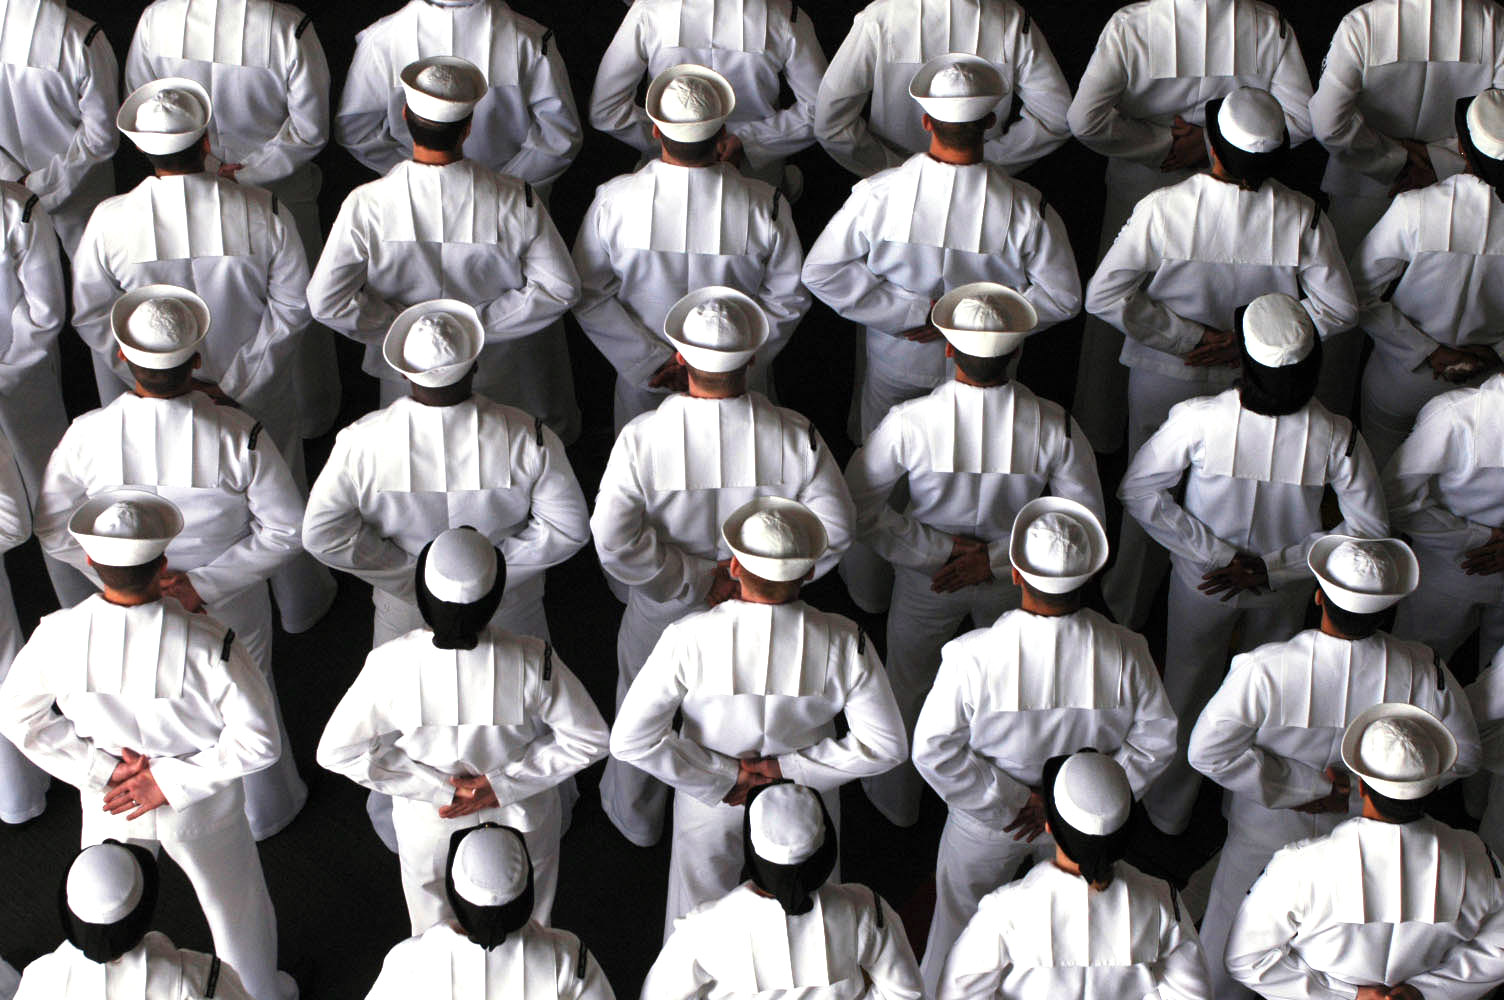 Sailors stand in formation during a change of command ceremony held aboard the Nimitz-class aircraft carrier USS John C. Stennis (CVN-74) in 2006. US Navy Photo